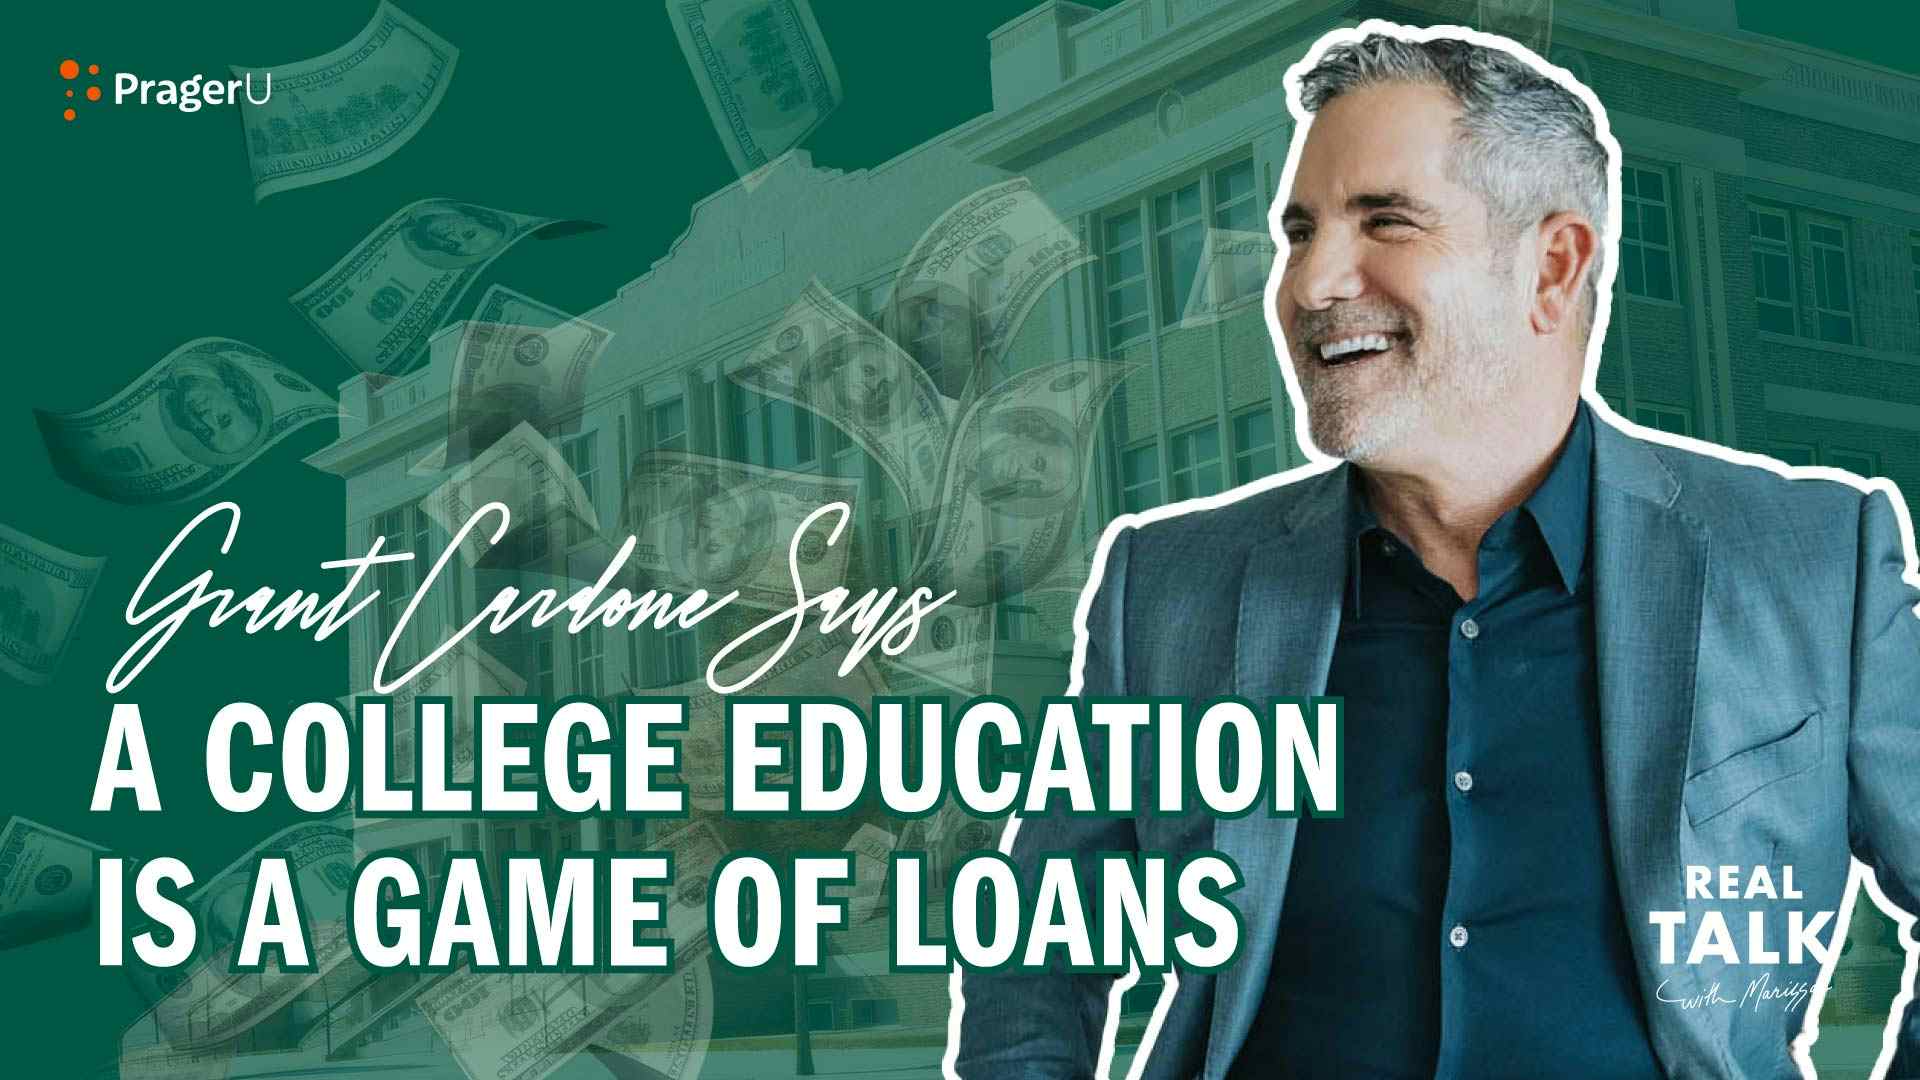 Grant Cardone Says a College Education Is a Game of Loans